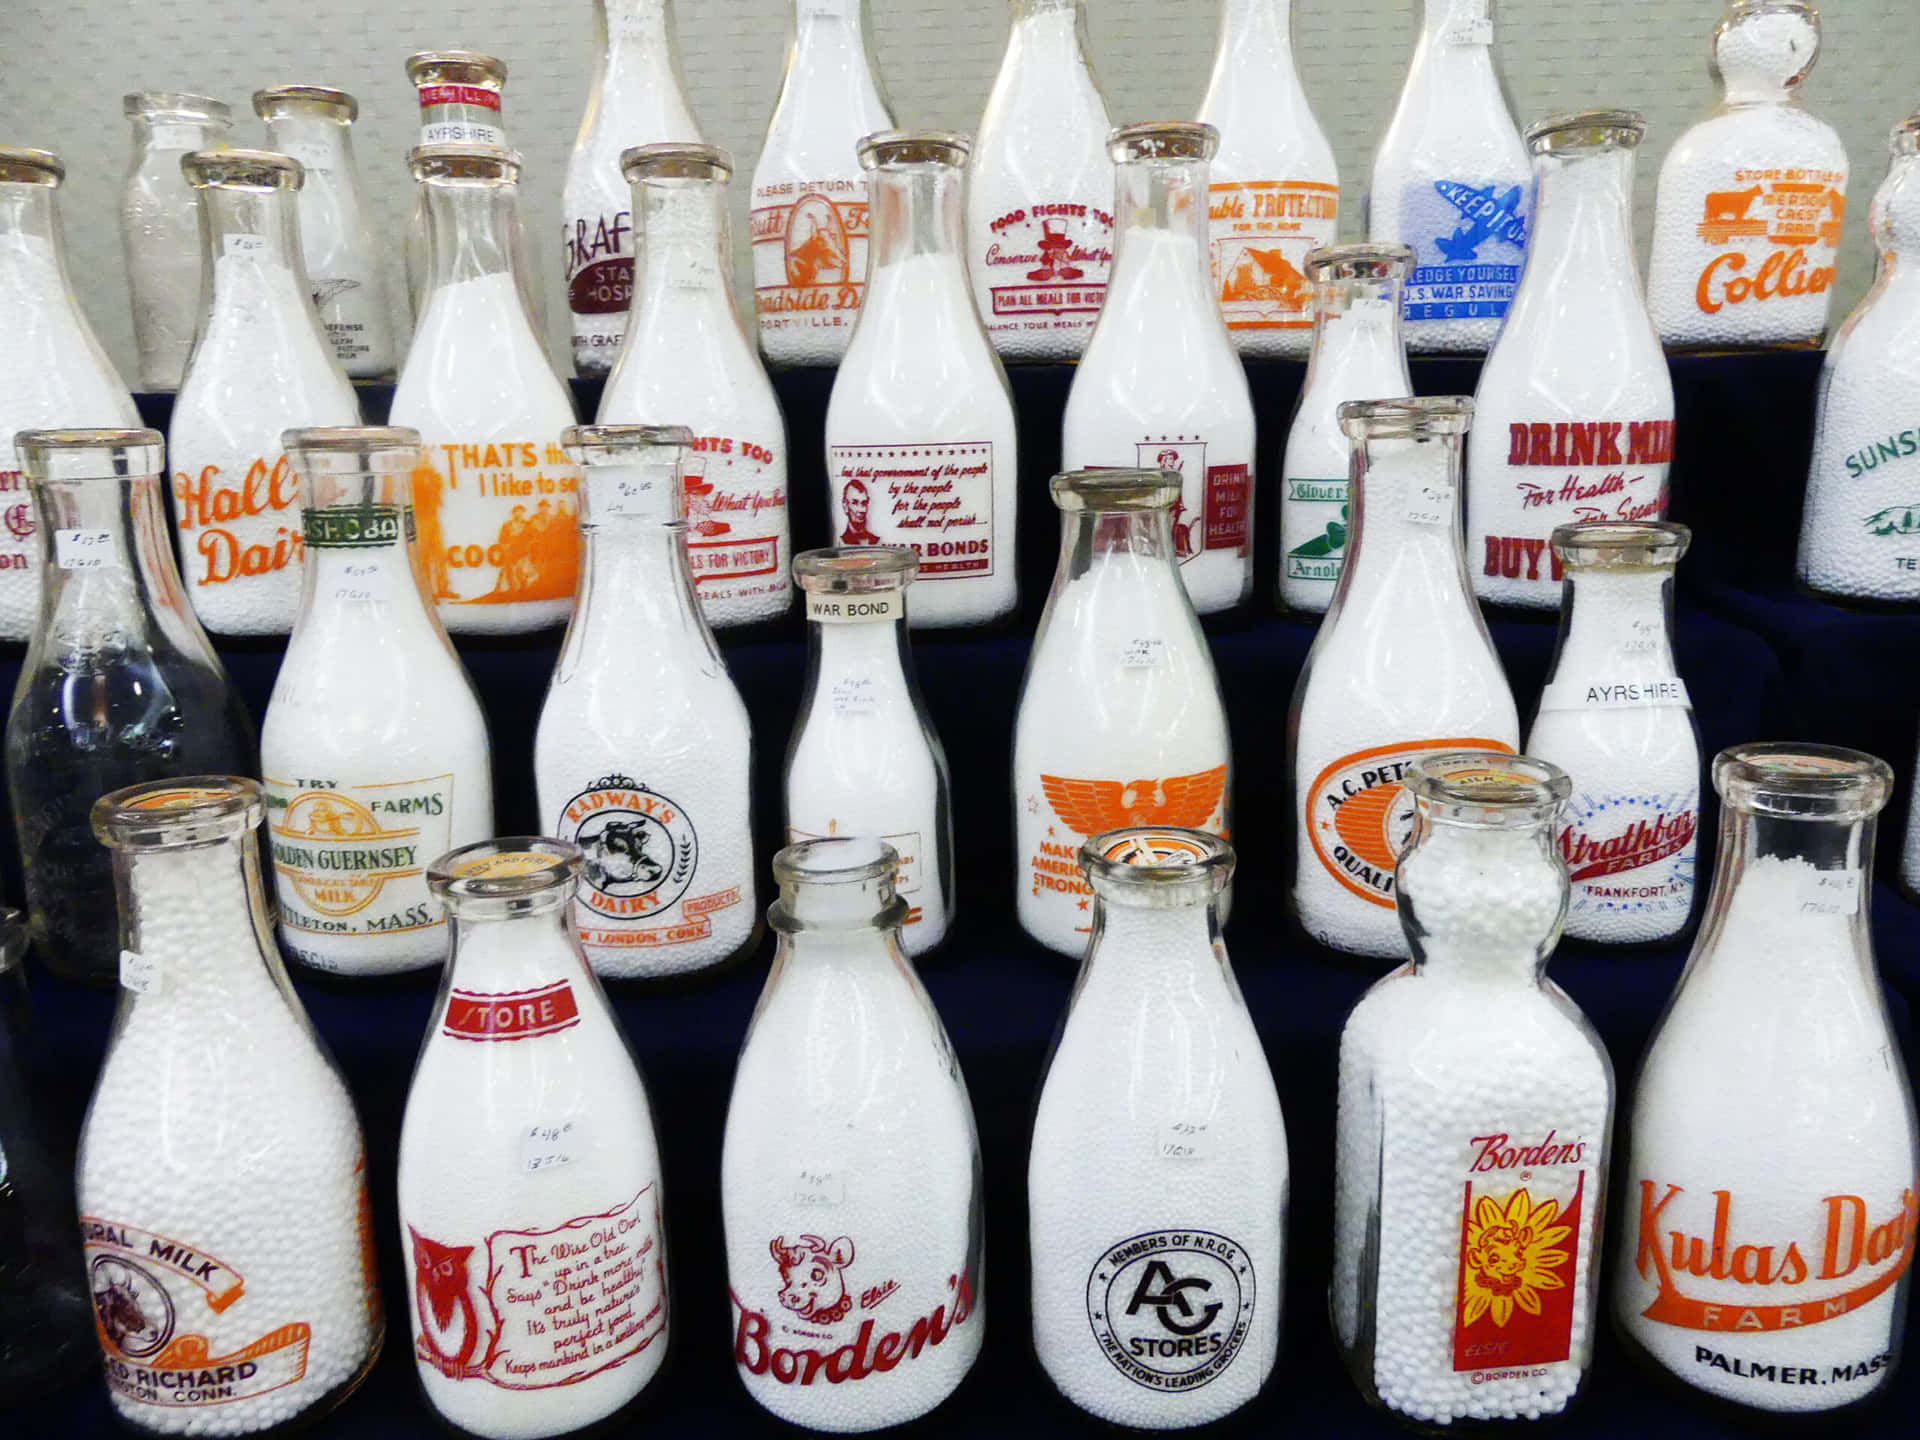 A Display Of Milk Bottles With Different Designs